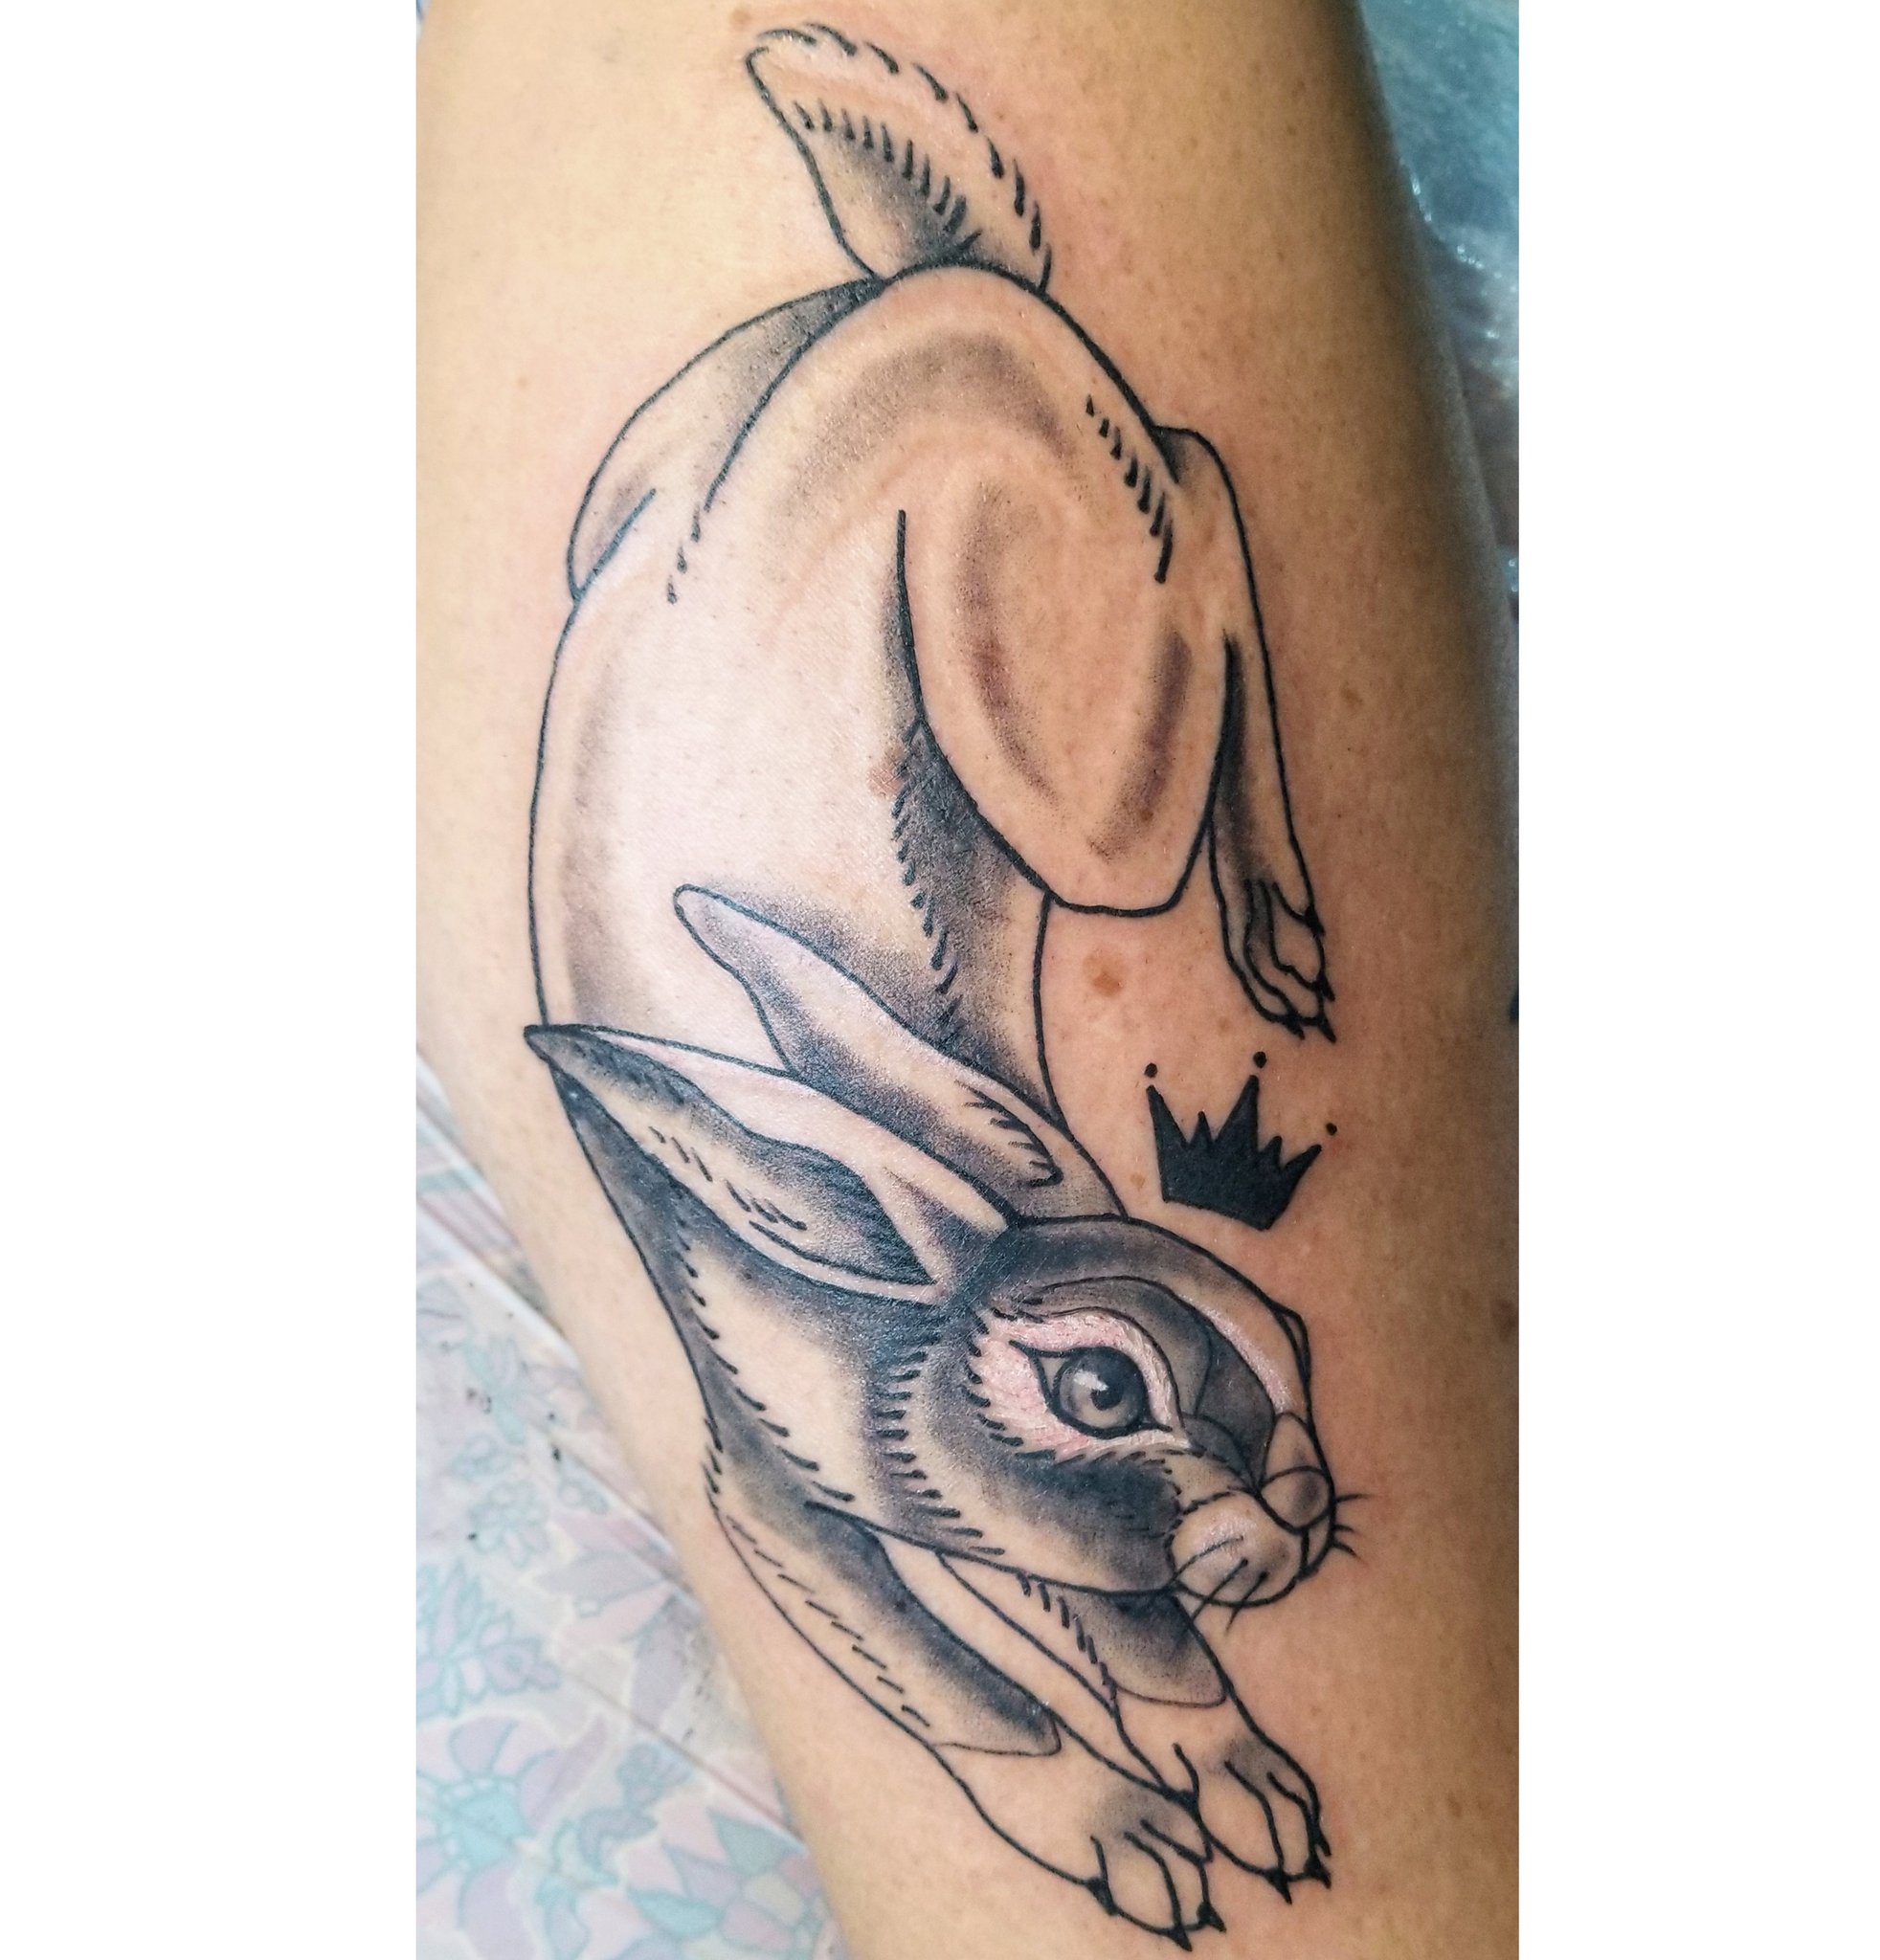 another bunny tattoo by Rienquish on DeviantArt